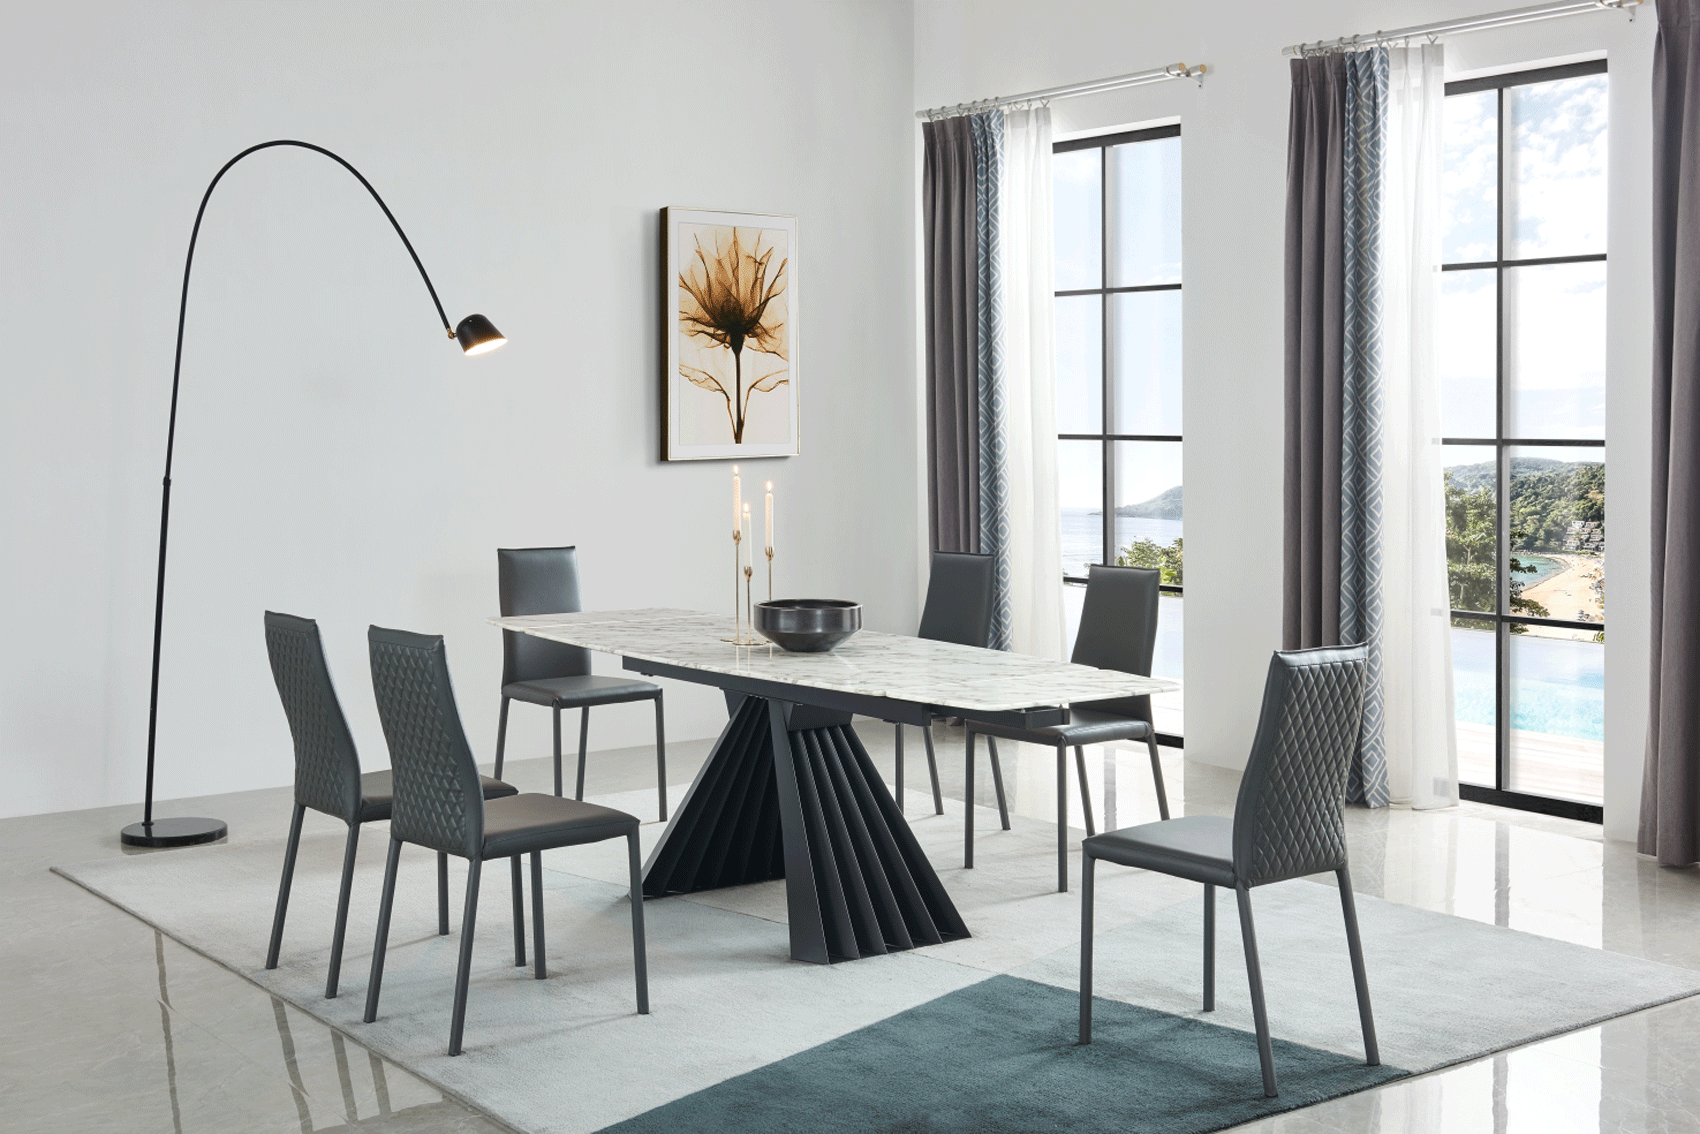 Dining Room Furniture Kitchen Tables and Chairs Sets 152 Marble Dining Table with 196 Grey Chairs